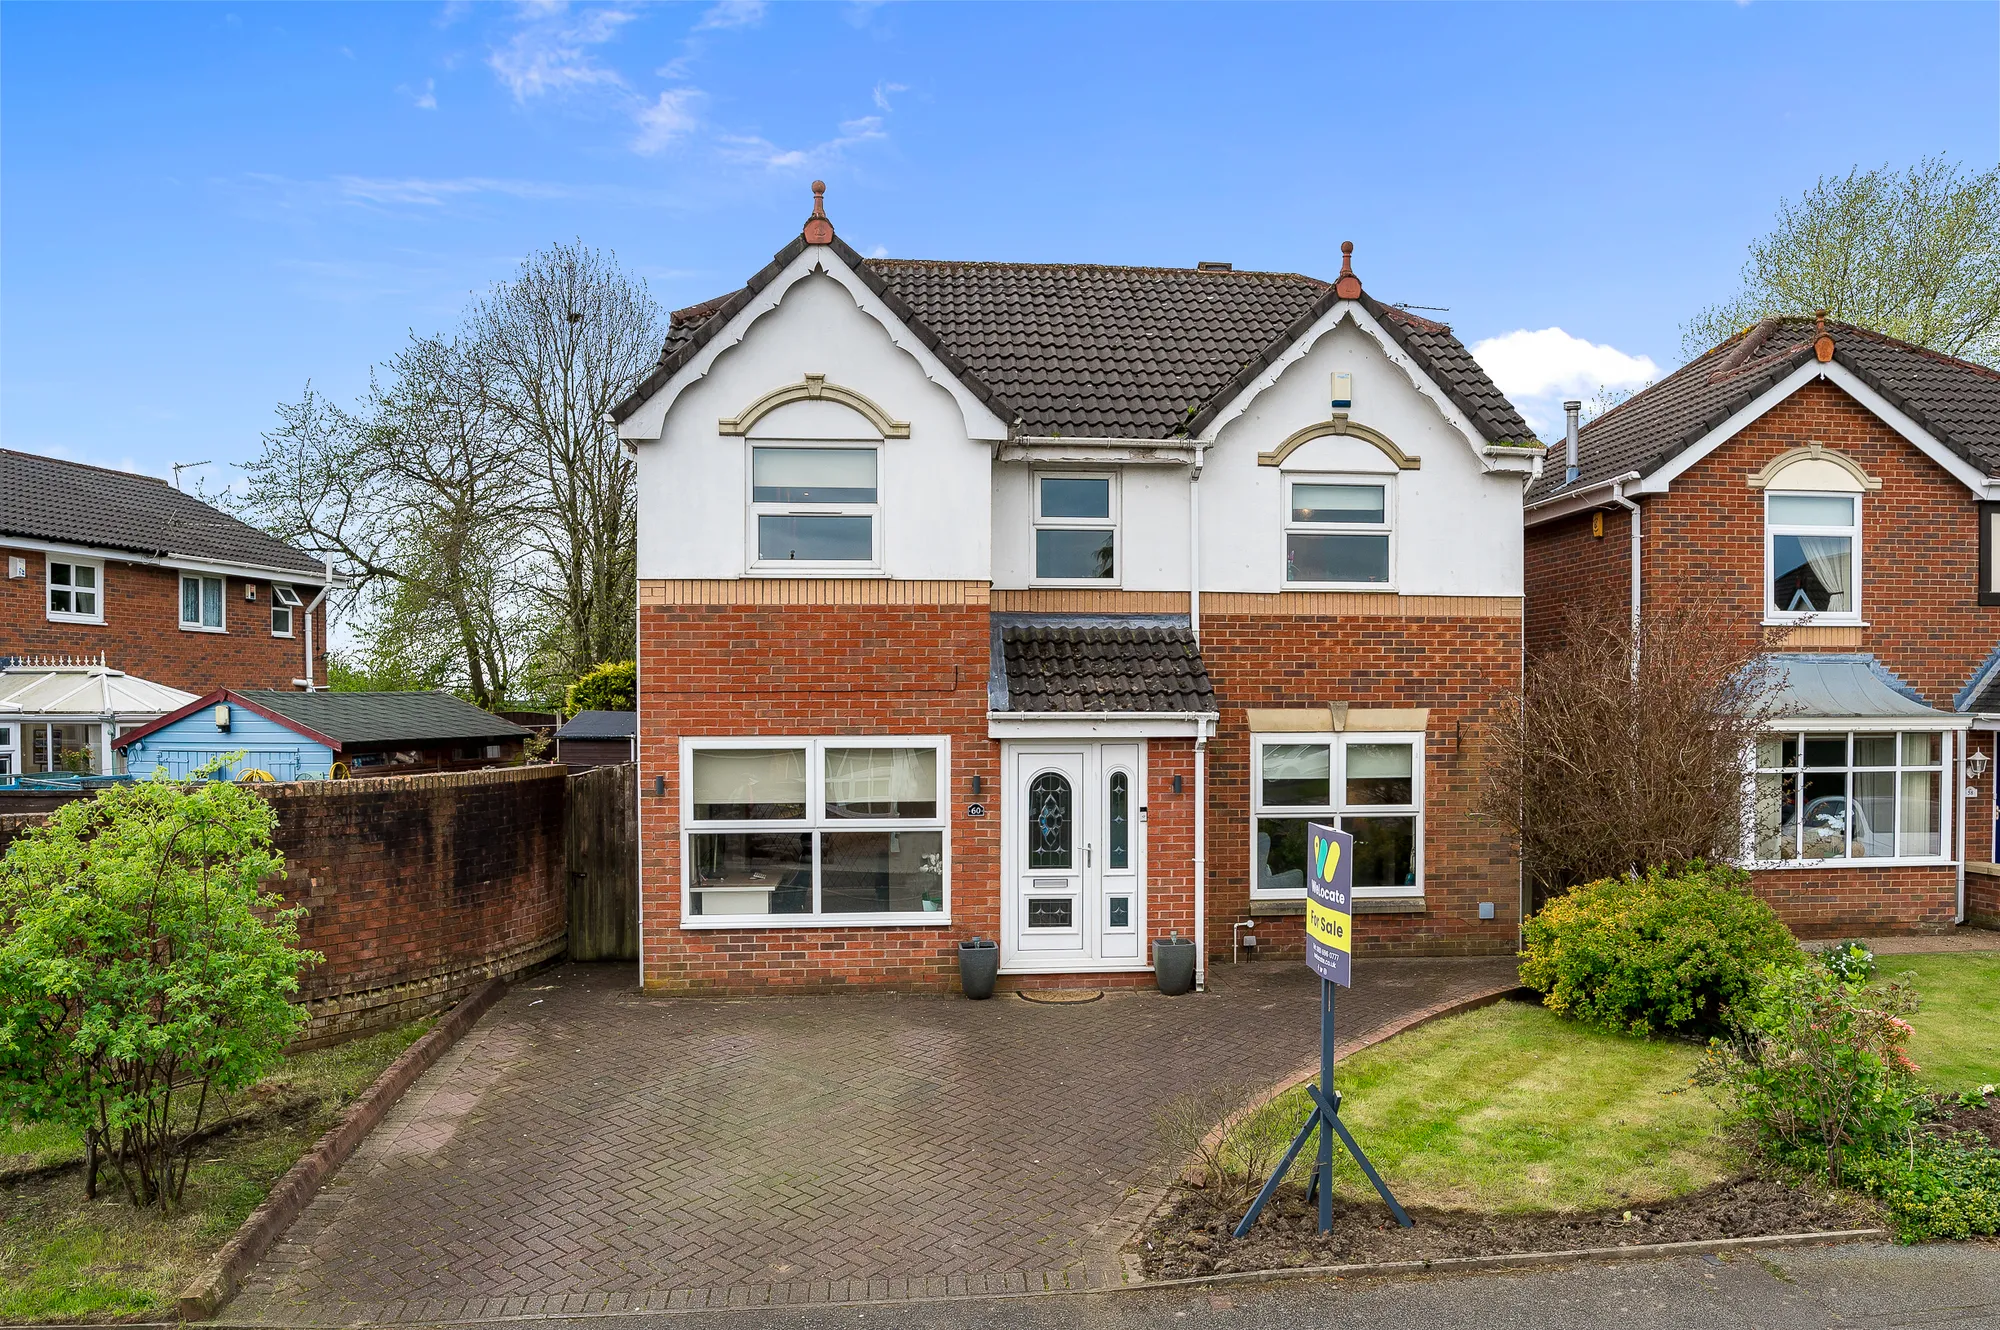 4 bed detached house for sale in Shetland Way, Manchester - Property Image 1